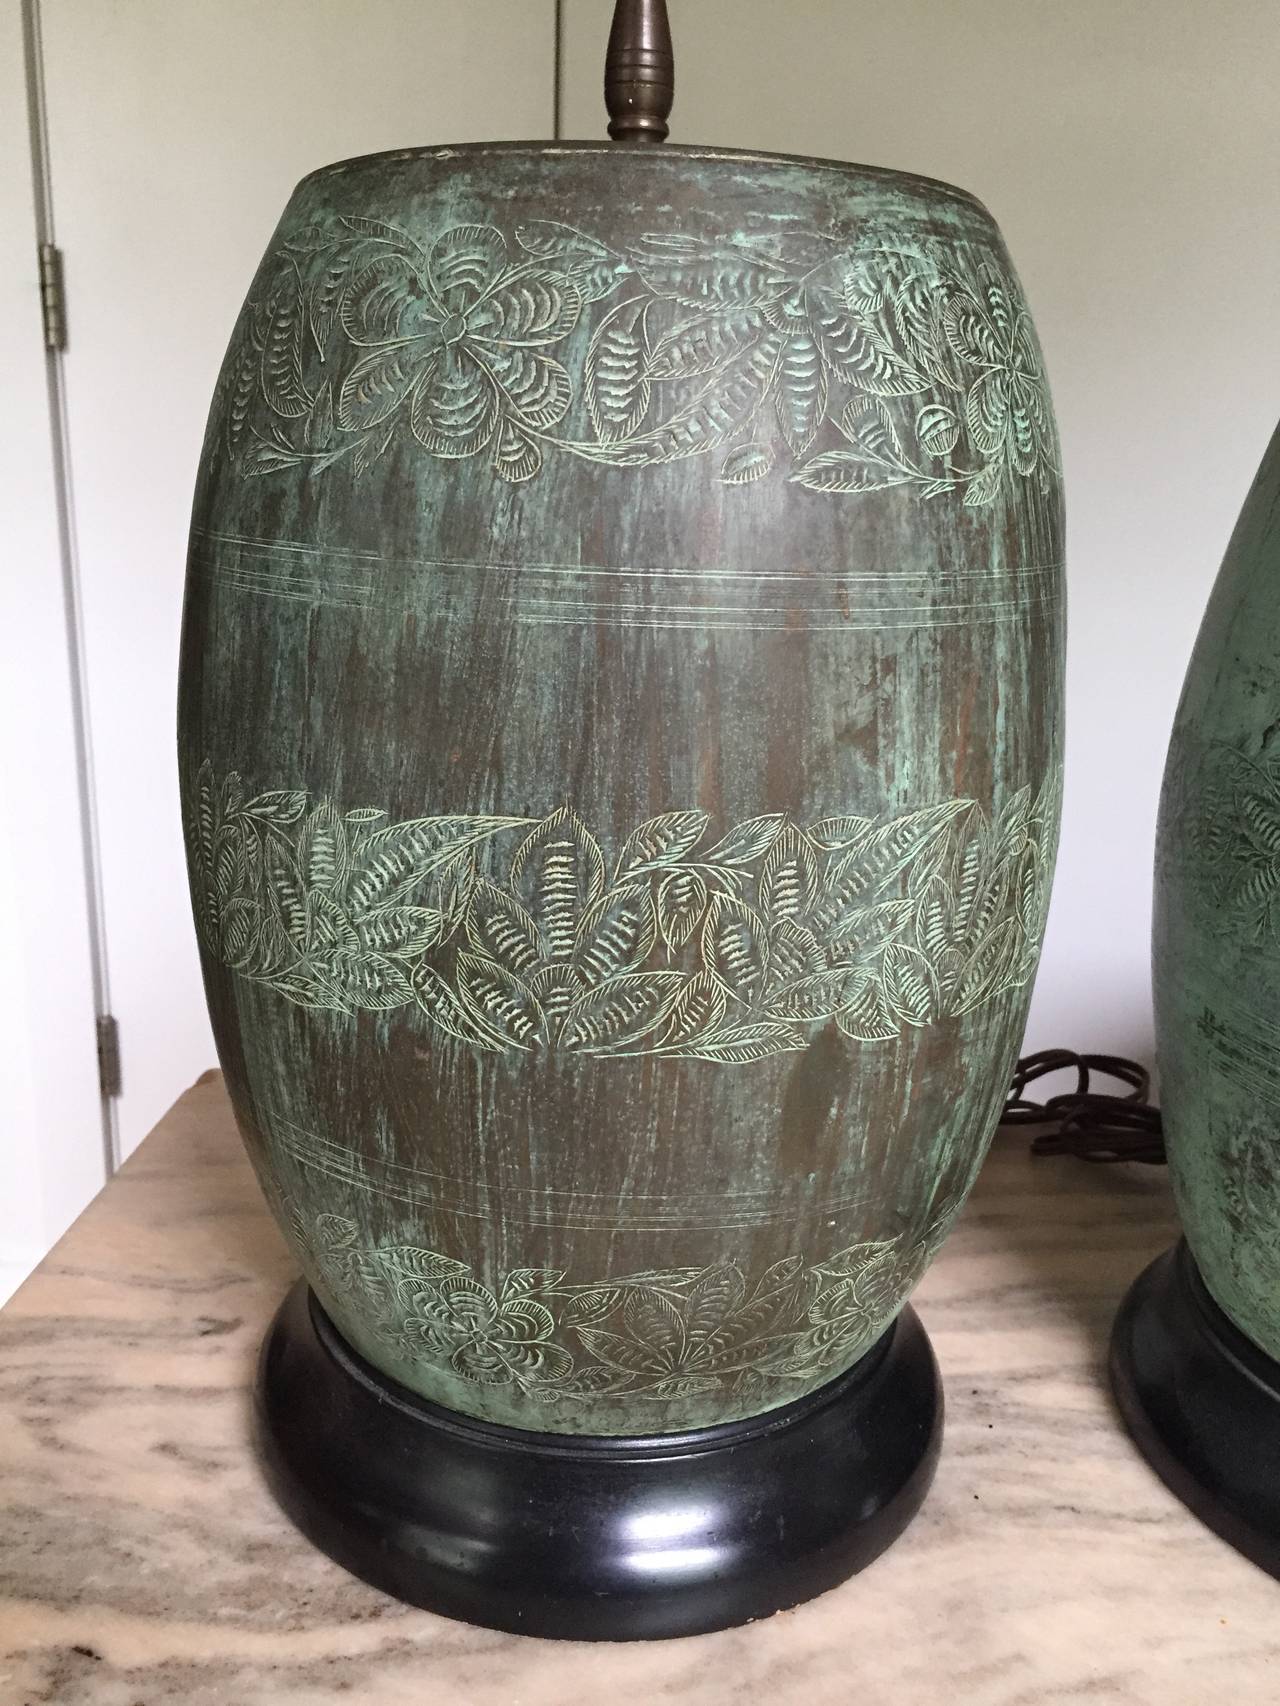 Bronze drum-shape bases etched with bands of fern decoration and deeply patinated with a vibrant green verdigris finish. Bronze drums are 14